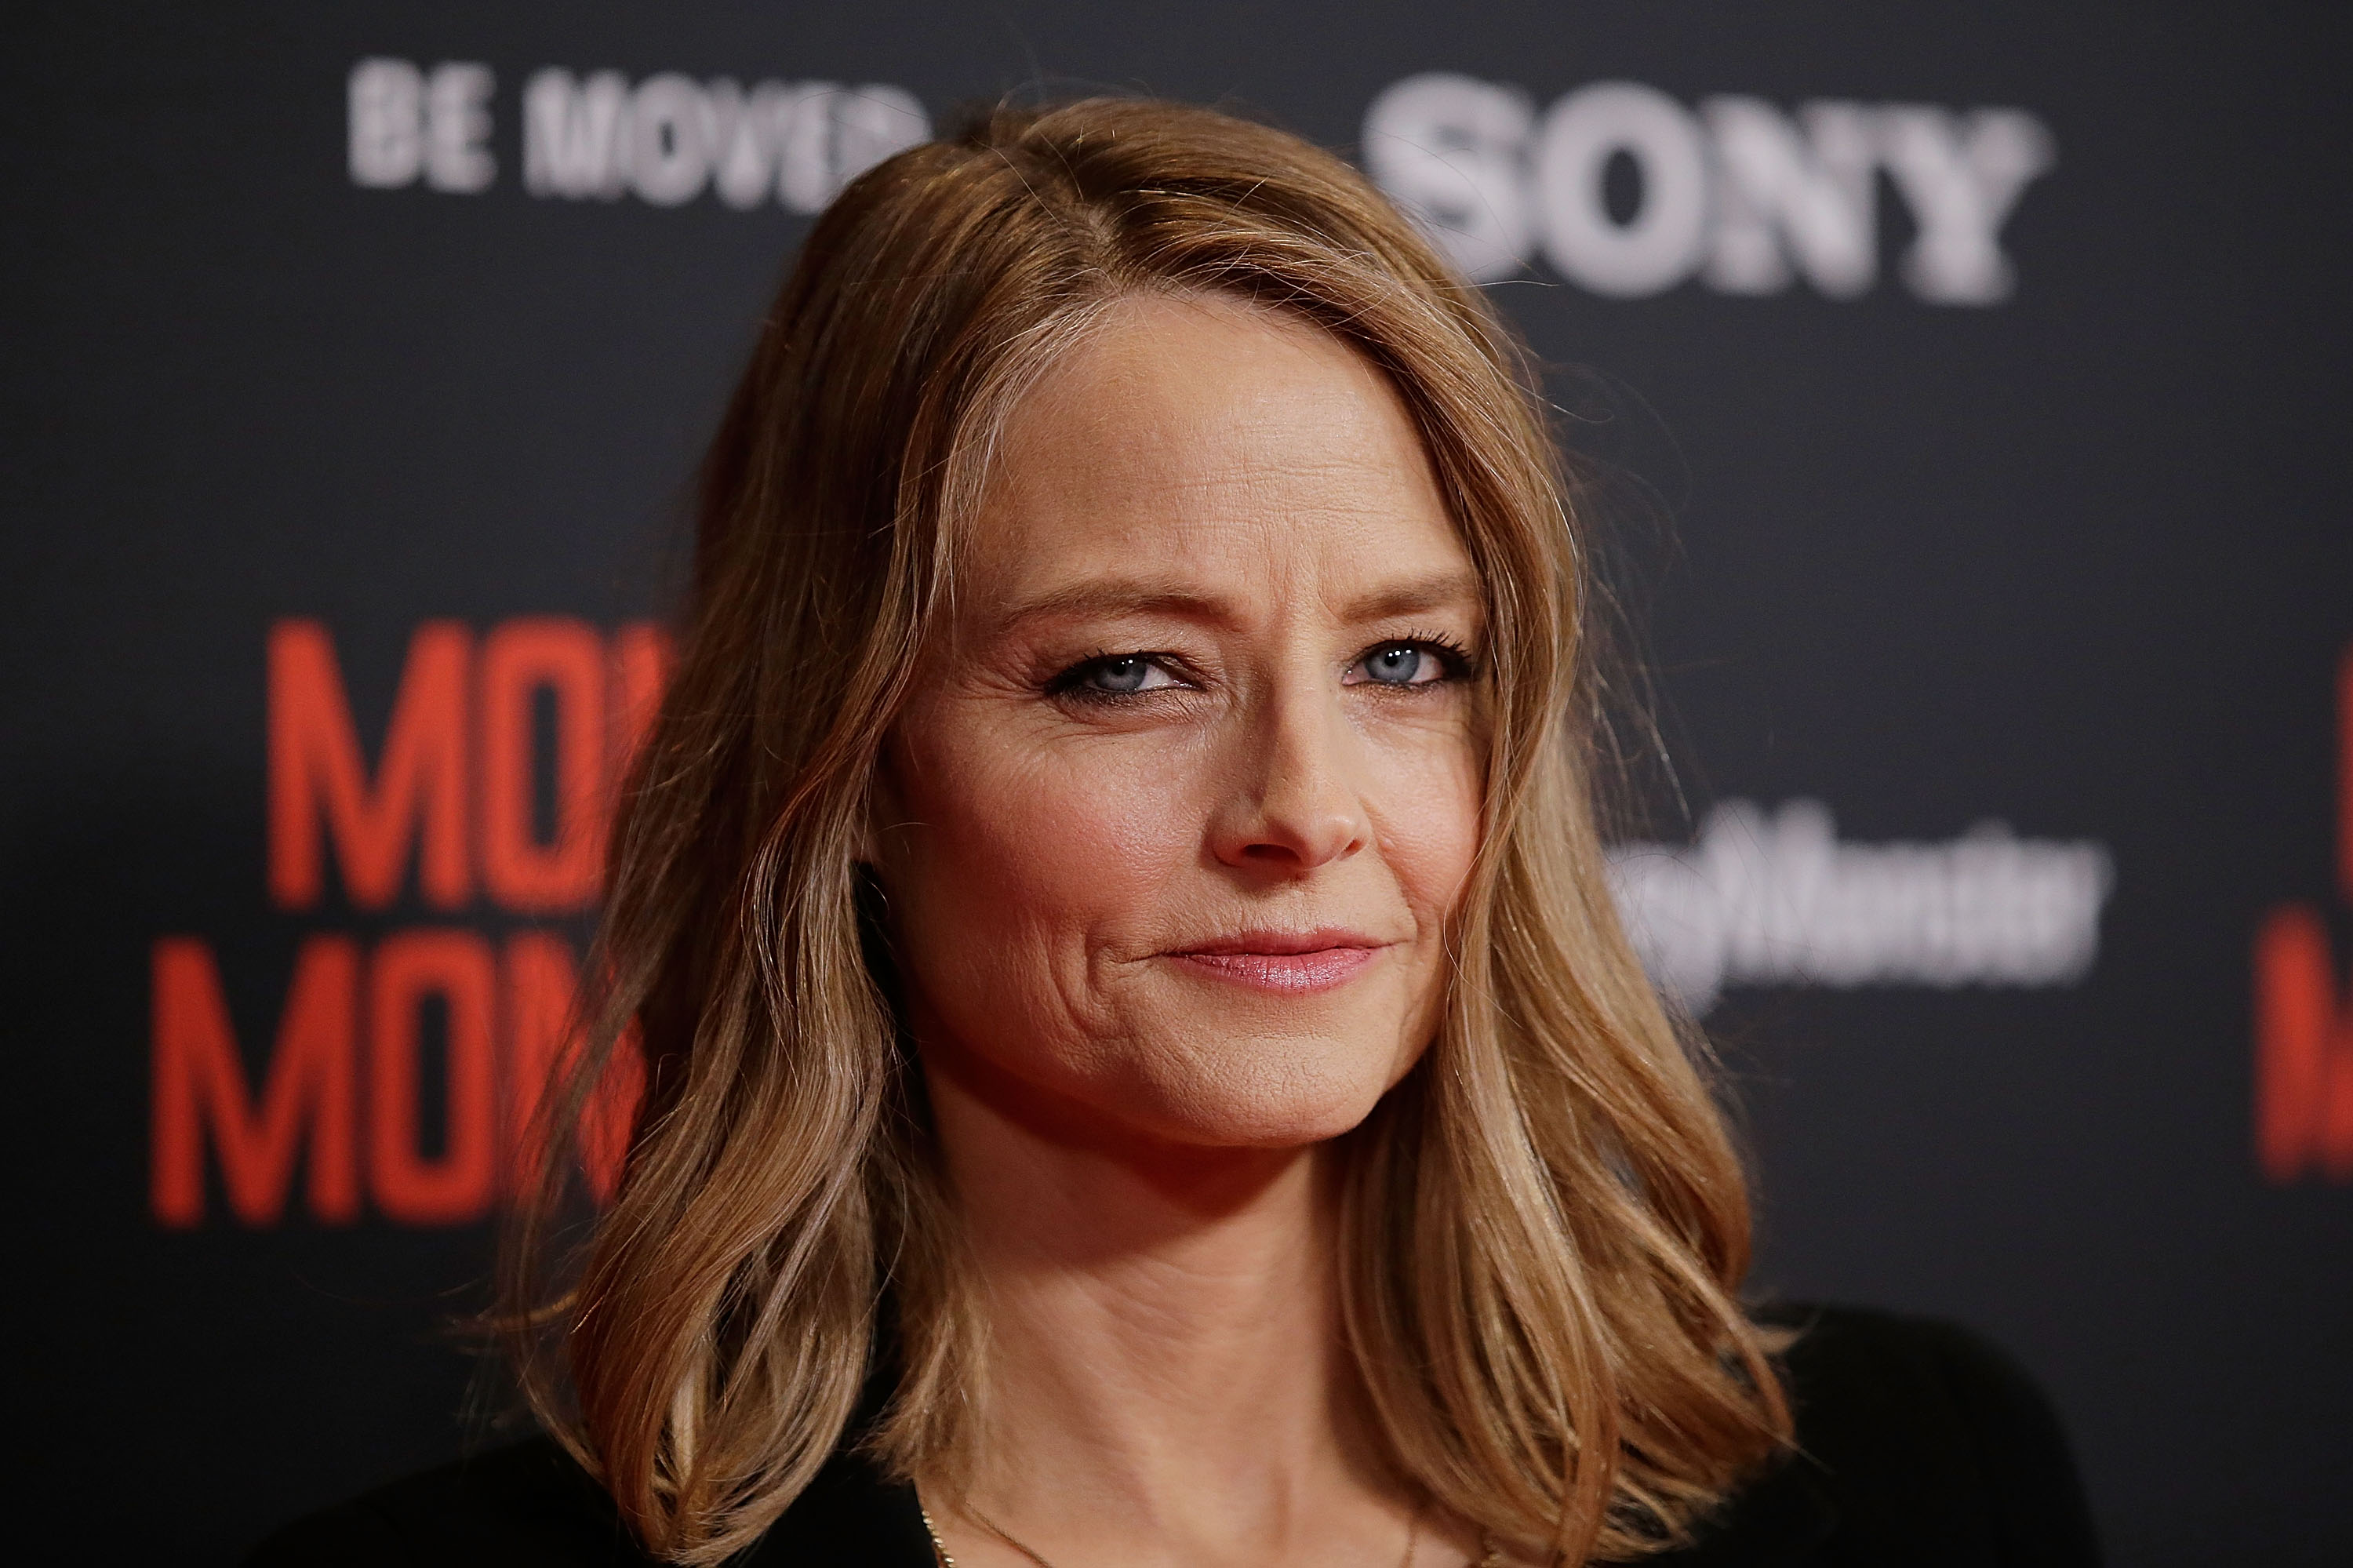  Jodie Foster on May 30, 2016 in Sydney, Australia | Source: Getty Images